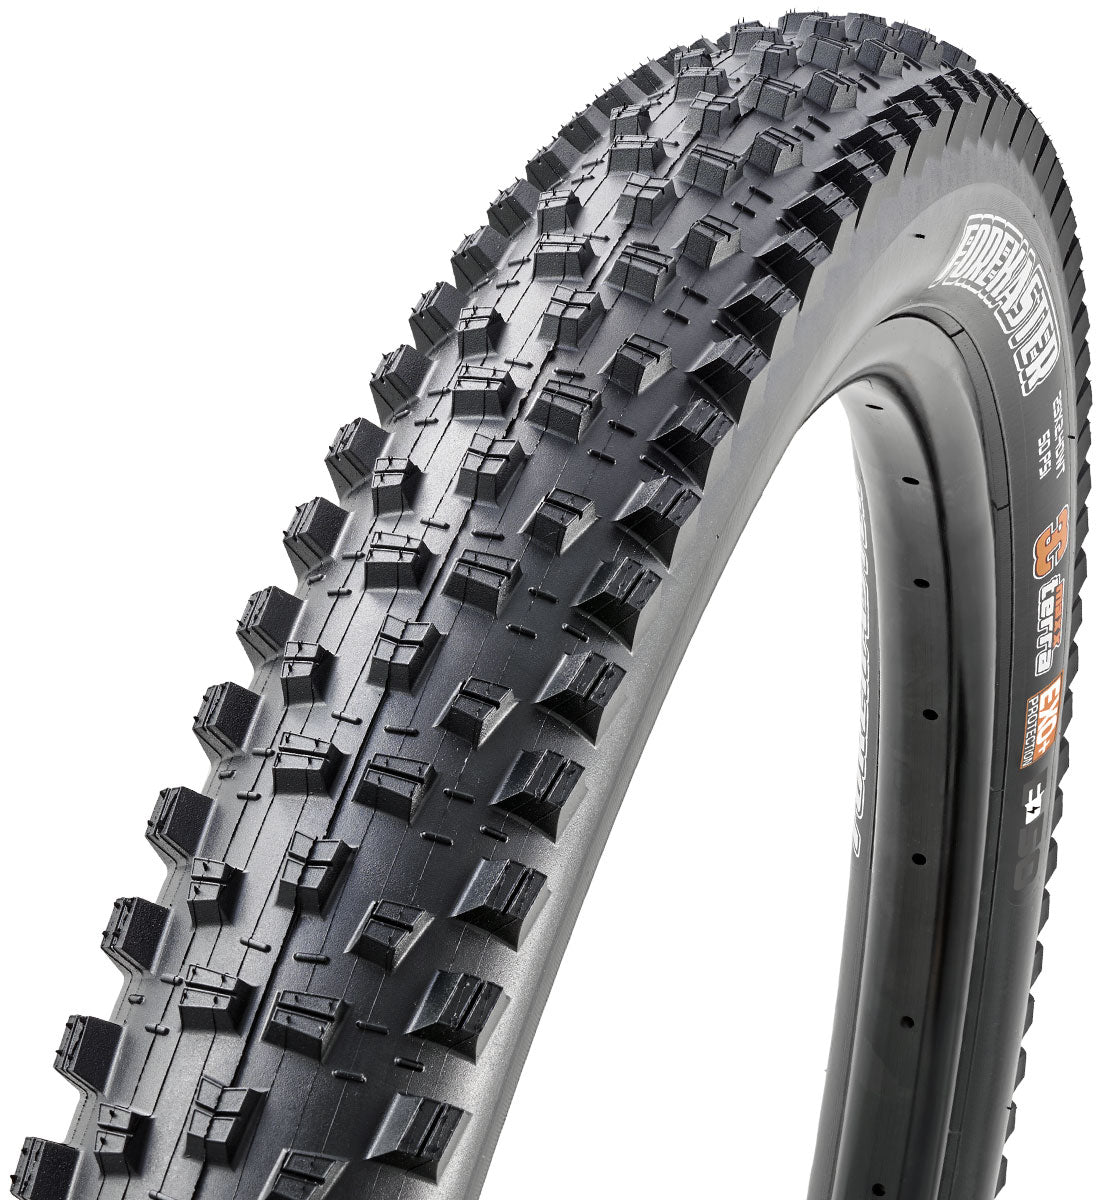 Maxxis Forecaster MTB Tyre